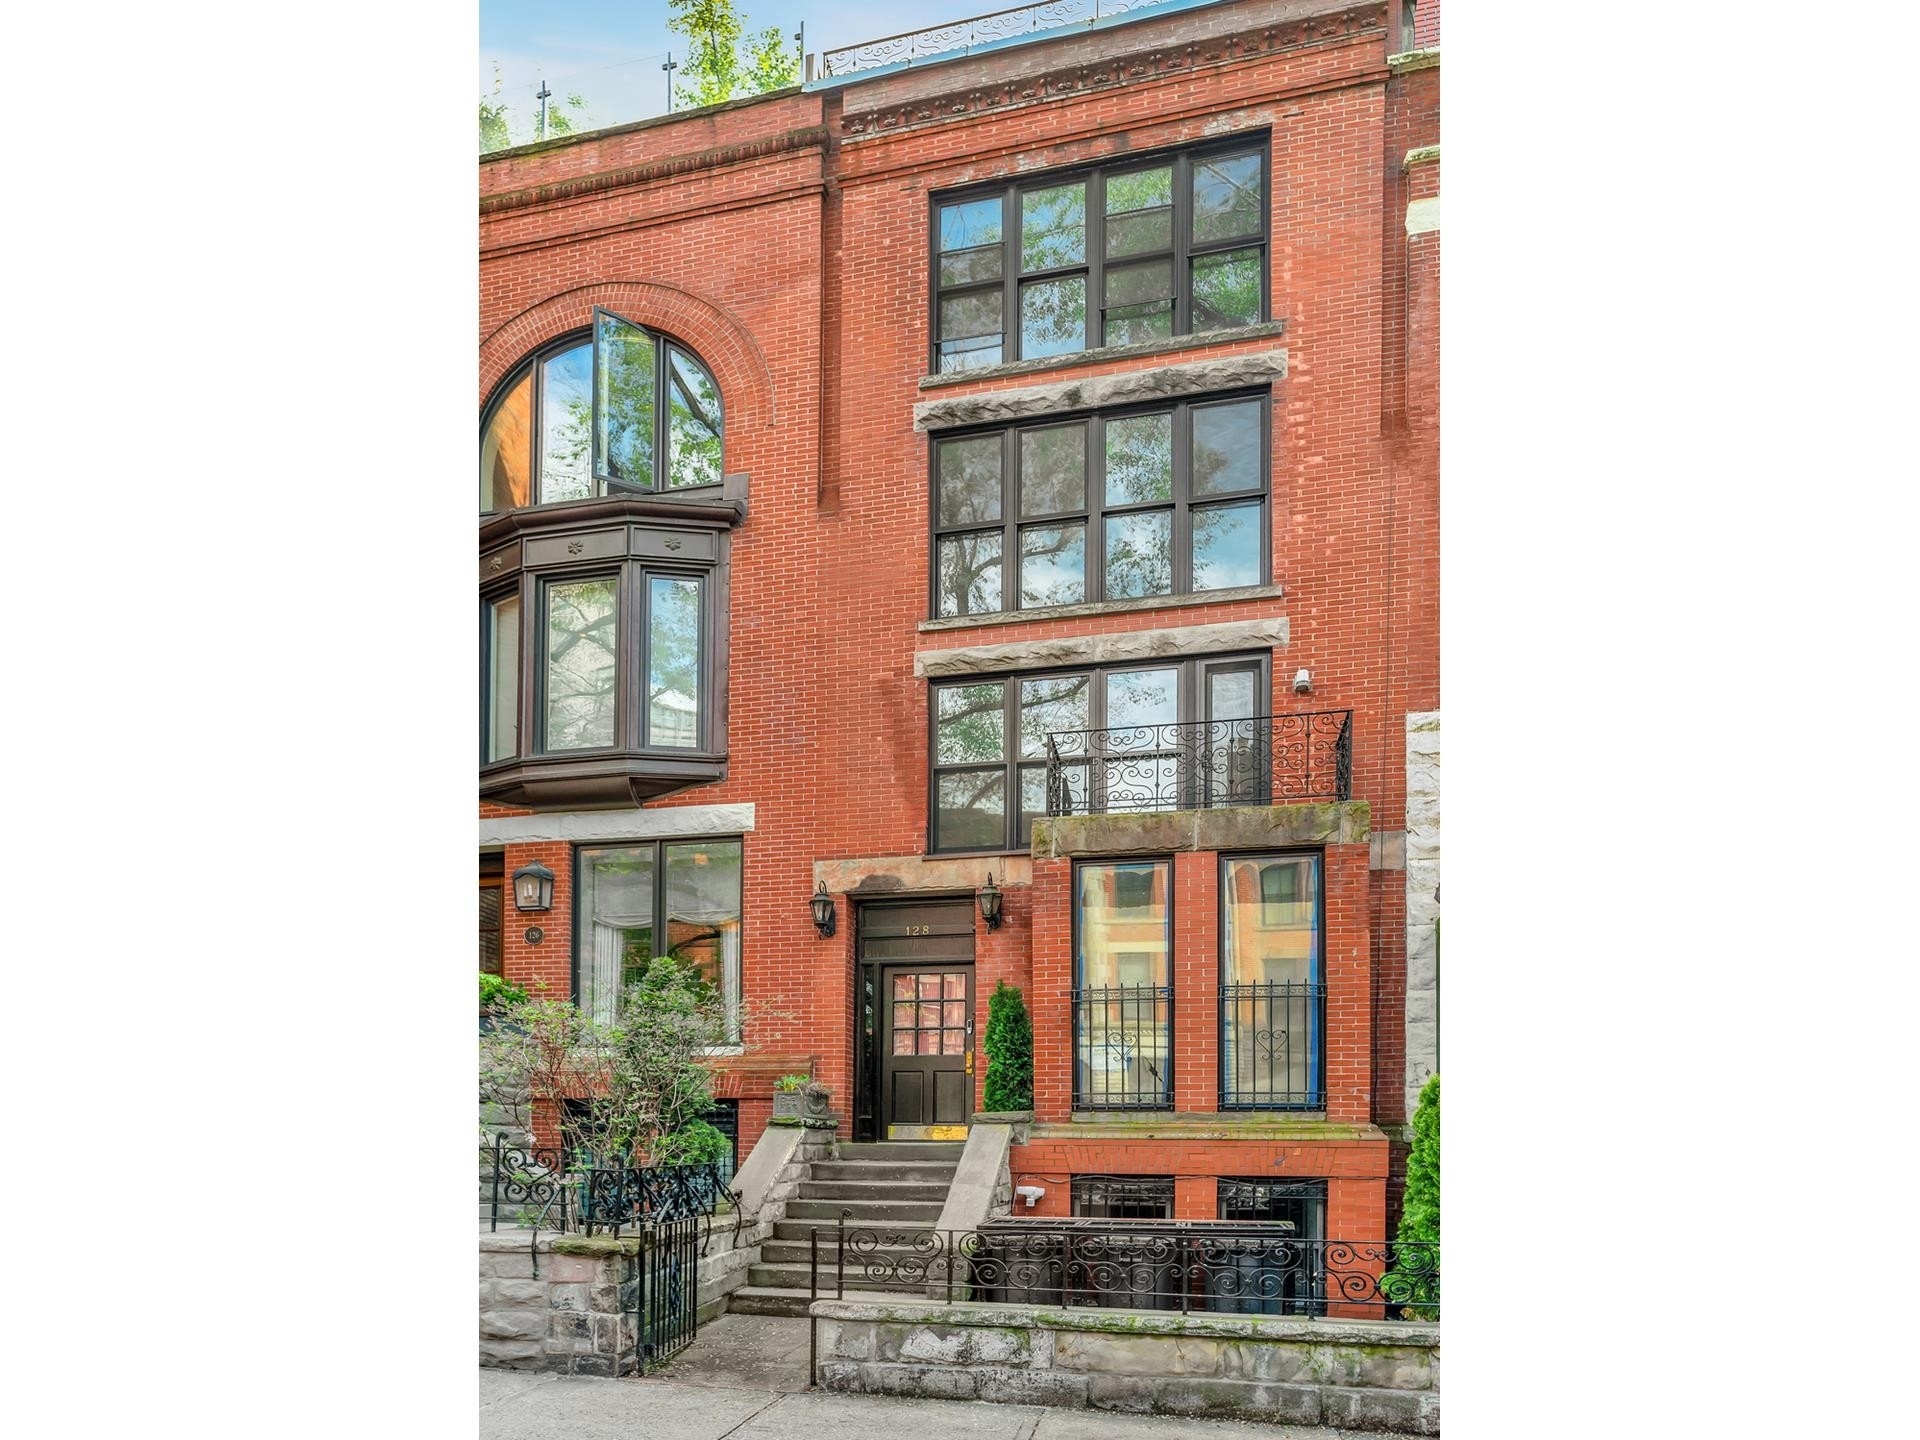 1. Single Family Townhouse for Sale at 128 W 95TH ST, TOWNHOUSE Upper West Side, New York, New York 10025